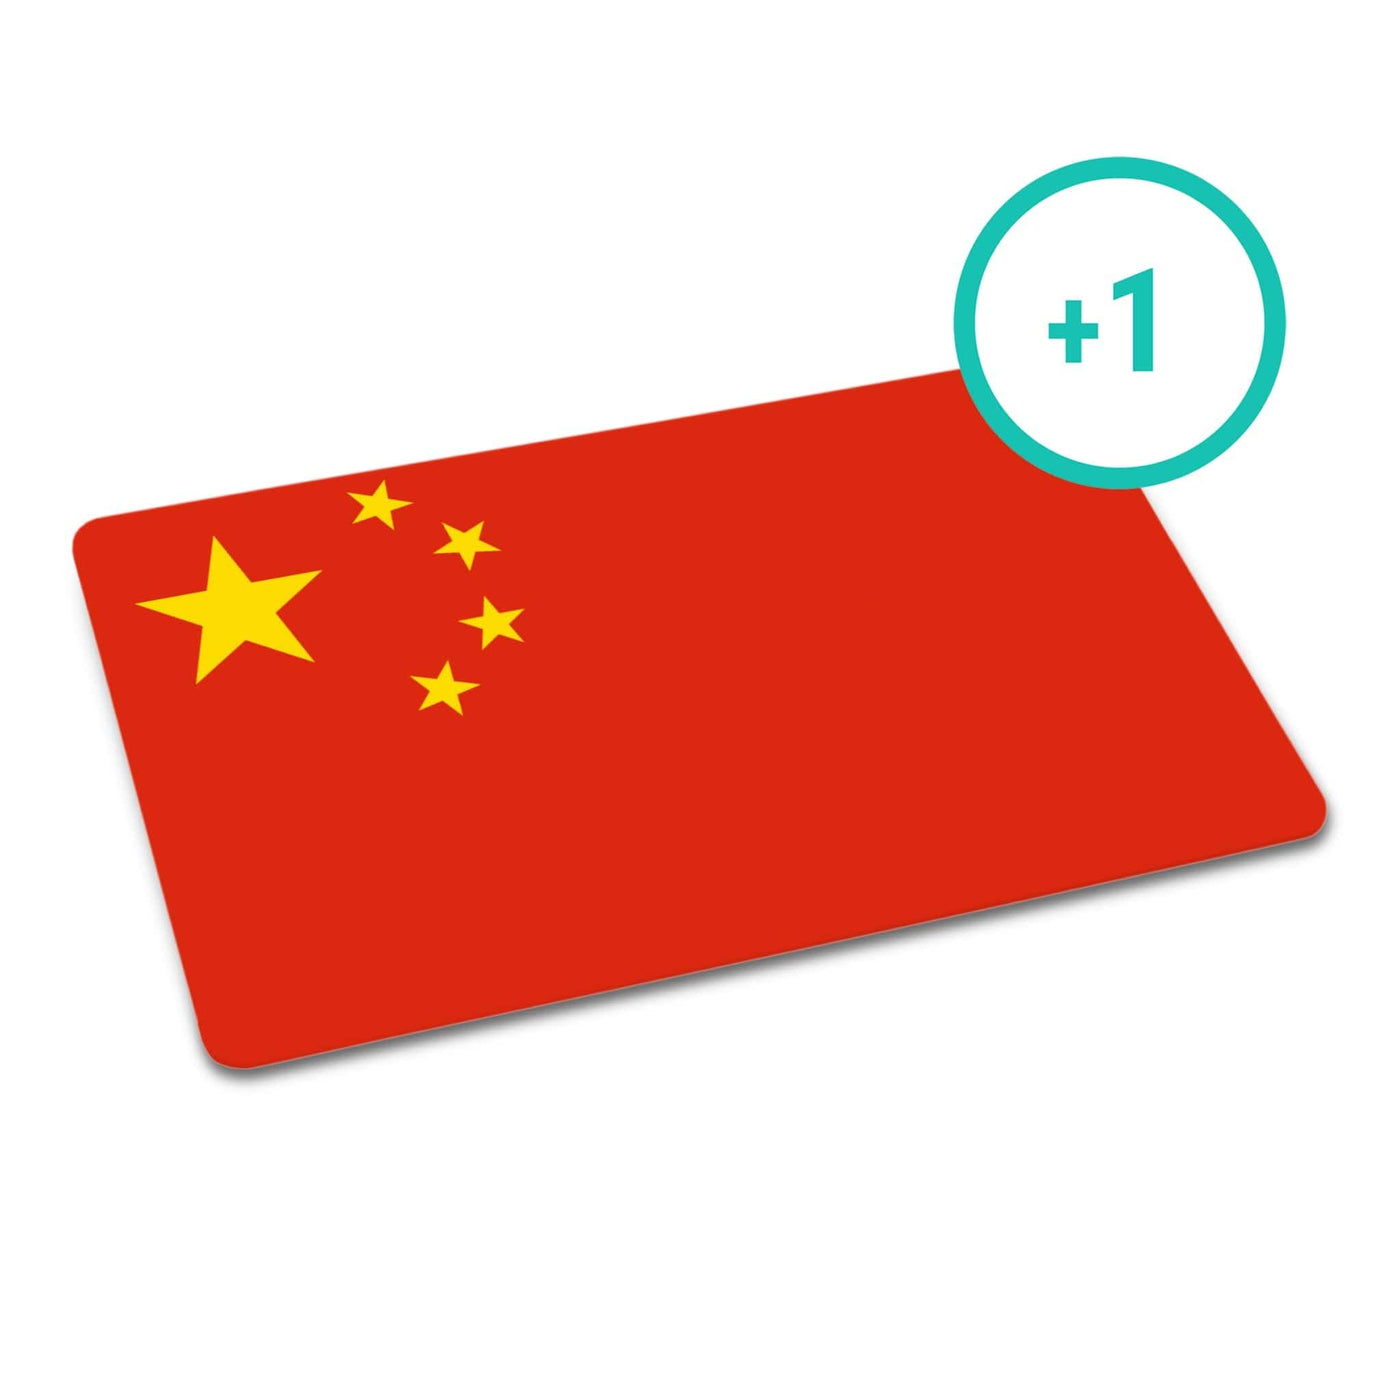 Additional Customized Card: Simplified Chinese (Leave in cart to purchase)